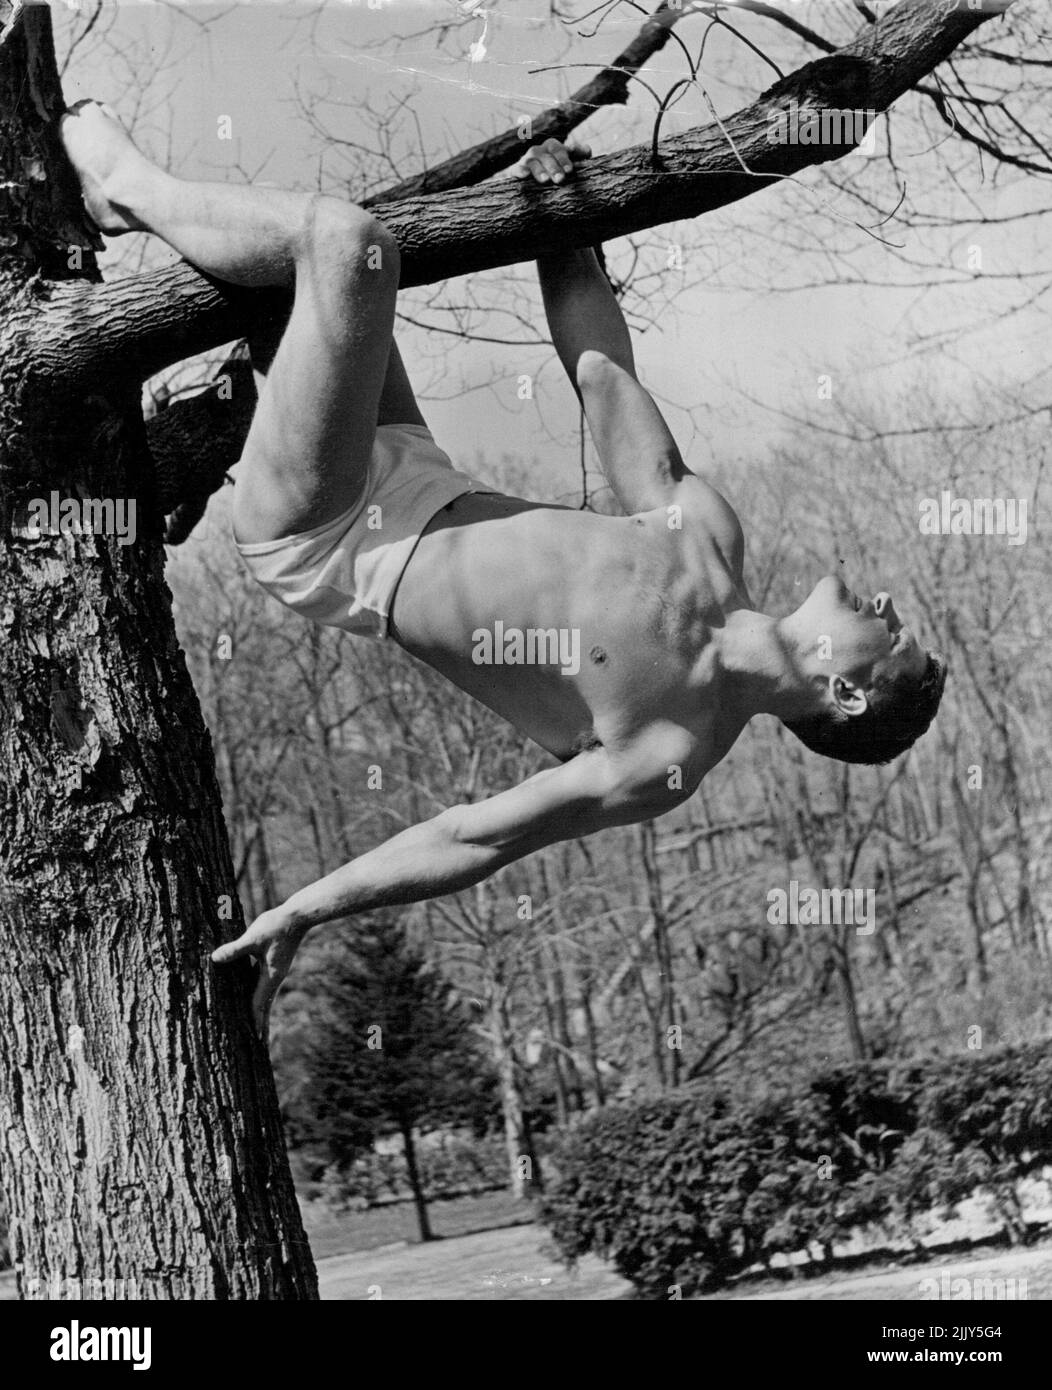 Boxer Trains For Fight By Nova Methods - Lou Nova a new star rising over the horison of prize fighting, trained for his fight with Max Baer at Dr. Pierre Bernard's Clarkstown Country Club in Rockland County, N.Y., where he prepared himself by yoga methods for the bout and he won... Among exercises recommended by Dr. Bernard is tree climbing, which is here zealously performed by Nova. Nova was a warded title Paramahamsas' which may be translated as 'equally developed in mind and body.' August 5, 1939. (Photo by Karger, Pix Publishing Inc.) Stock Photo